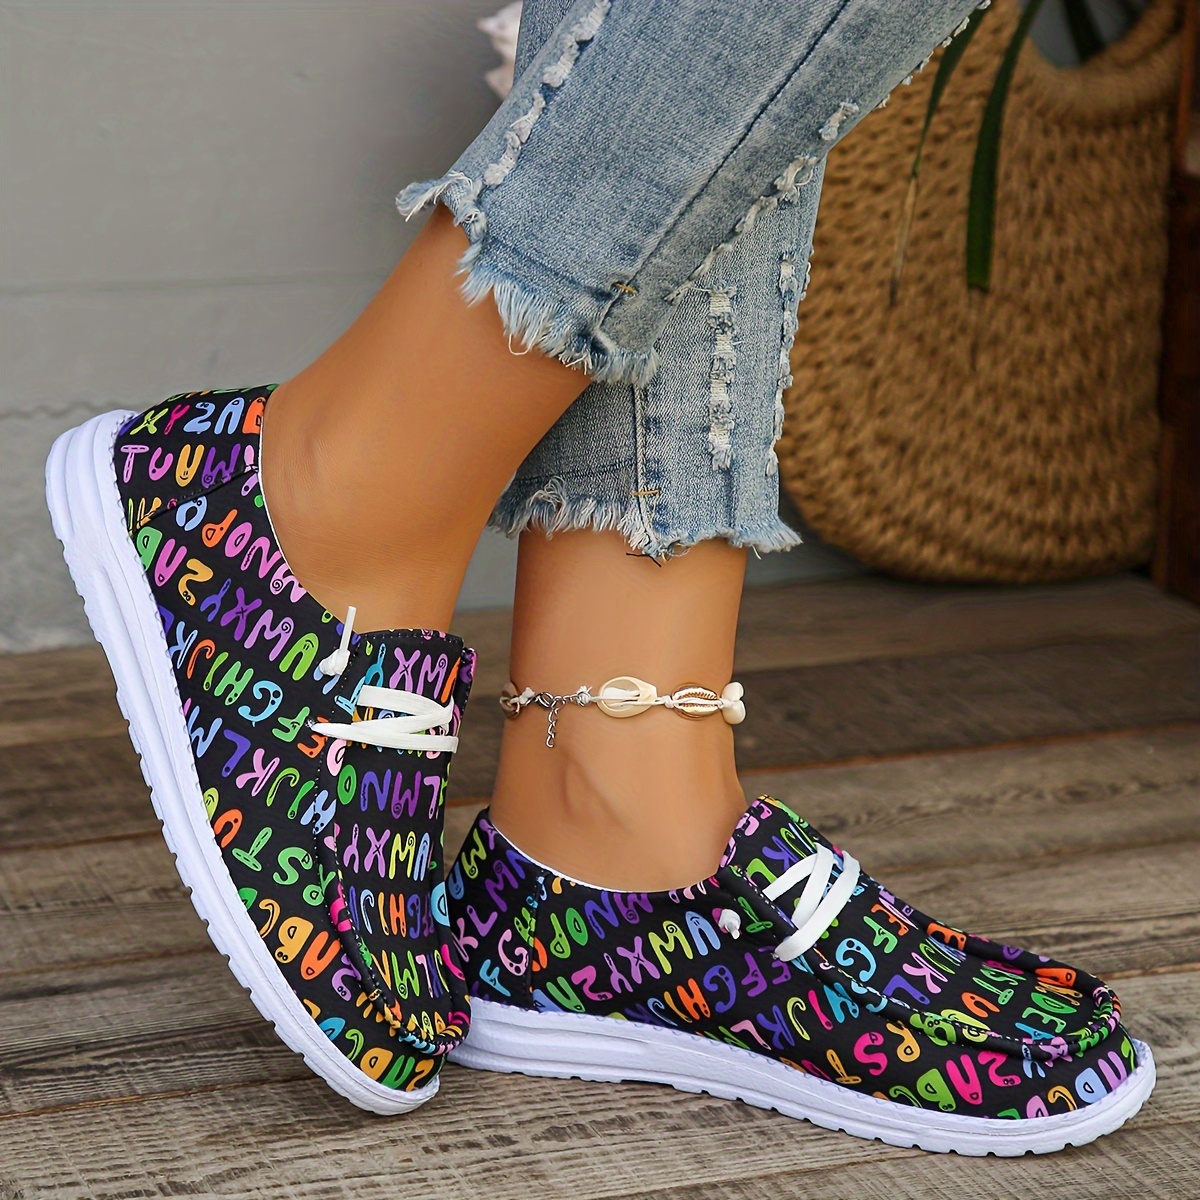 

Women's Casual Slip-on Sneakers, Colorful Alphabet Graffiti Pattern, Breathable Lightweight Canvas Shoes